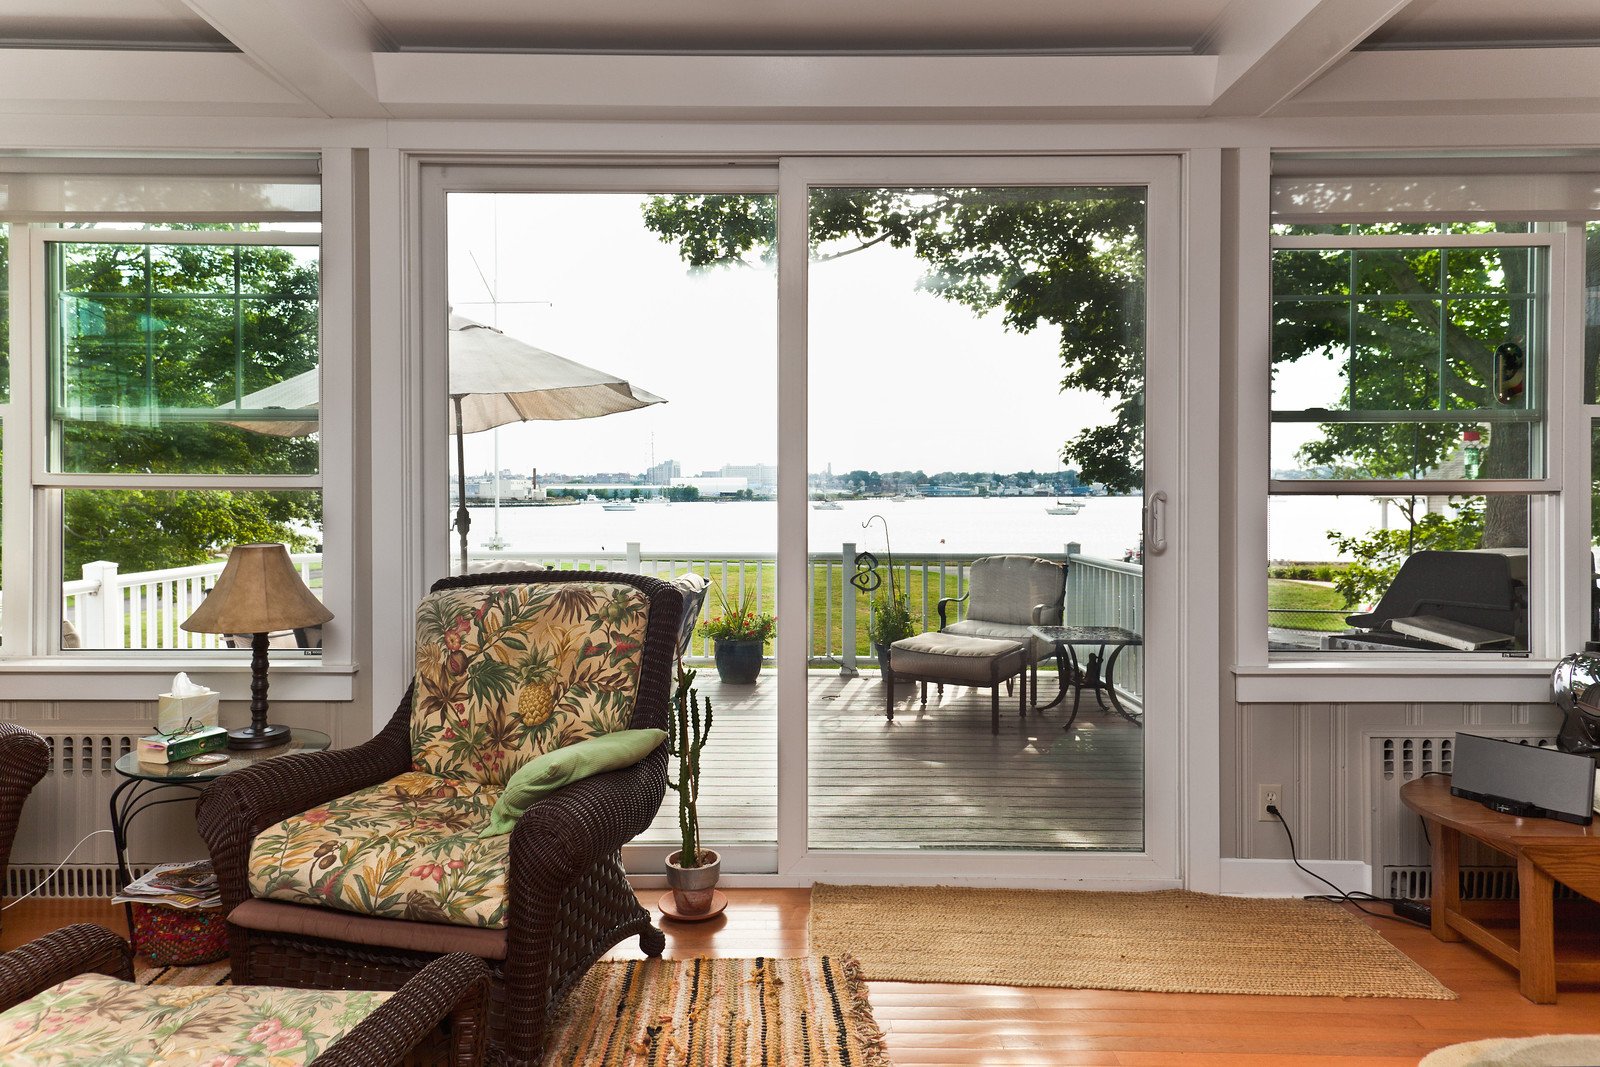 Getting Quality Windows for Your Home on the Water